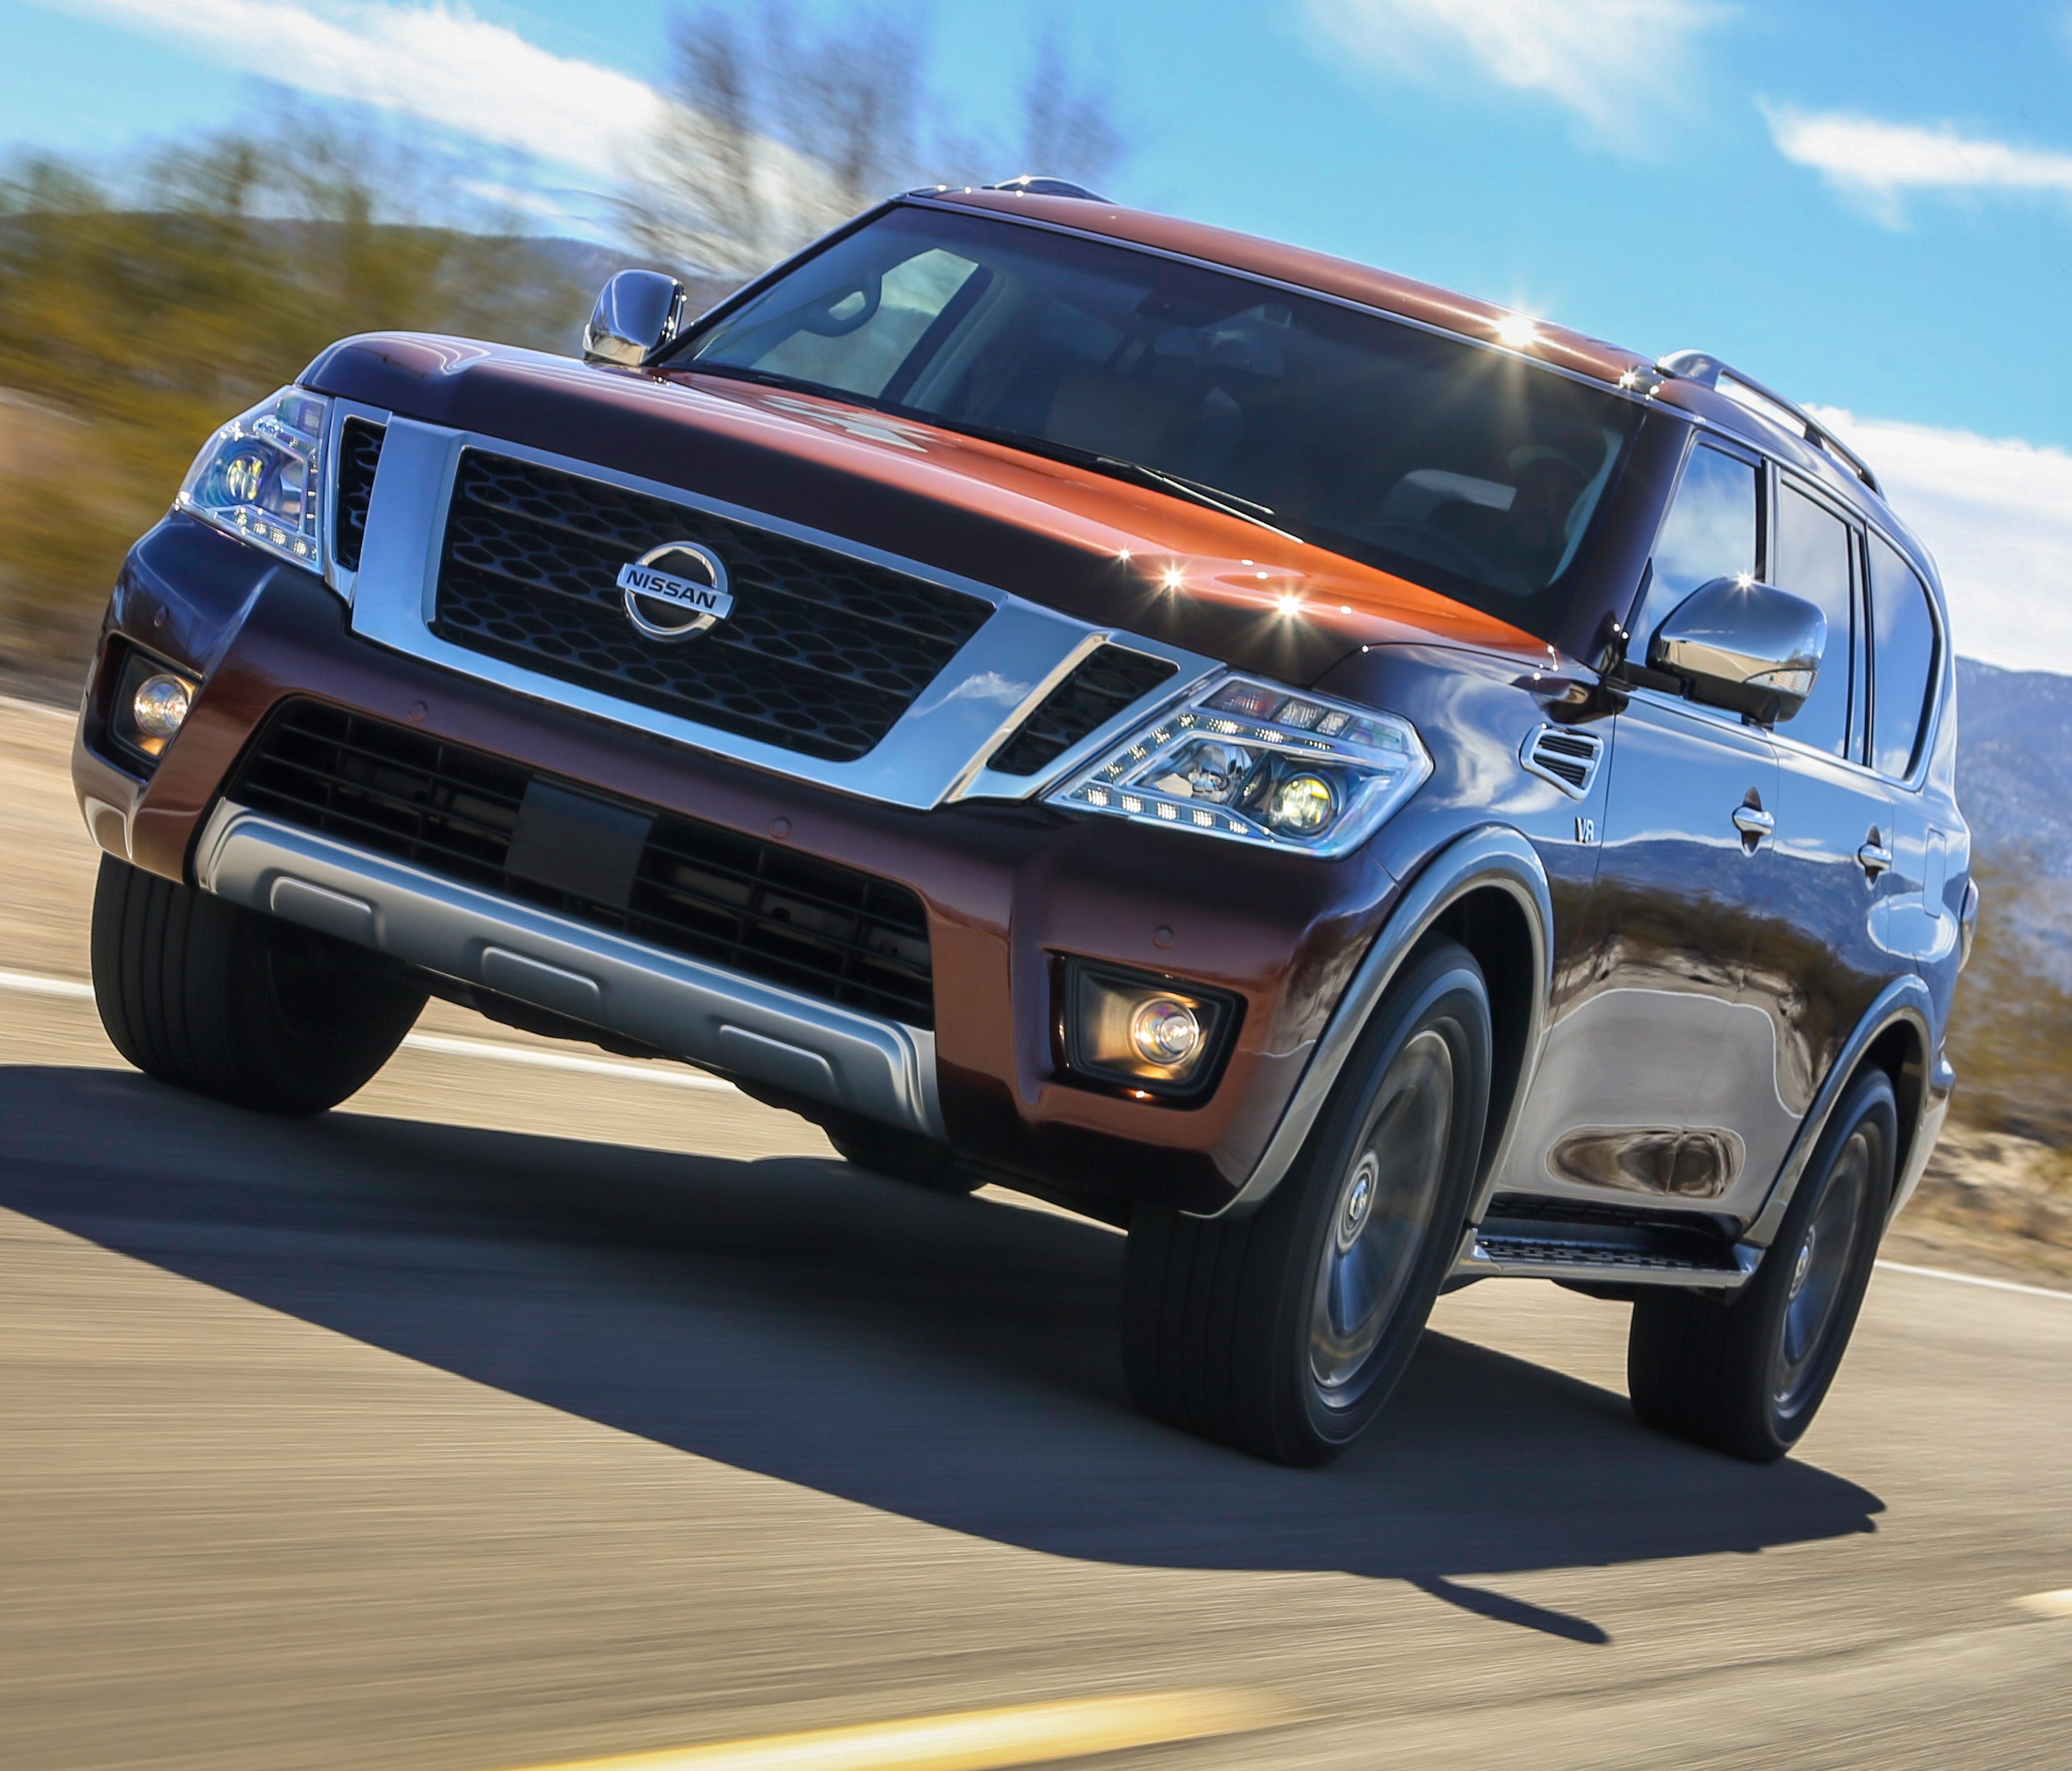 Nissan's Armada is a big, traditional SUV that seats eight